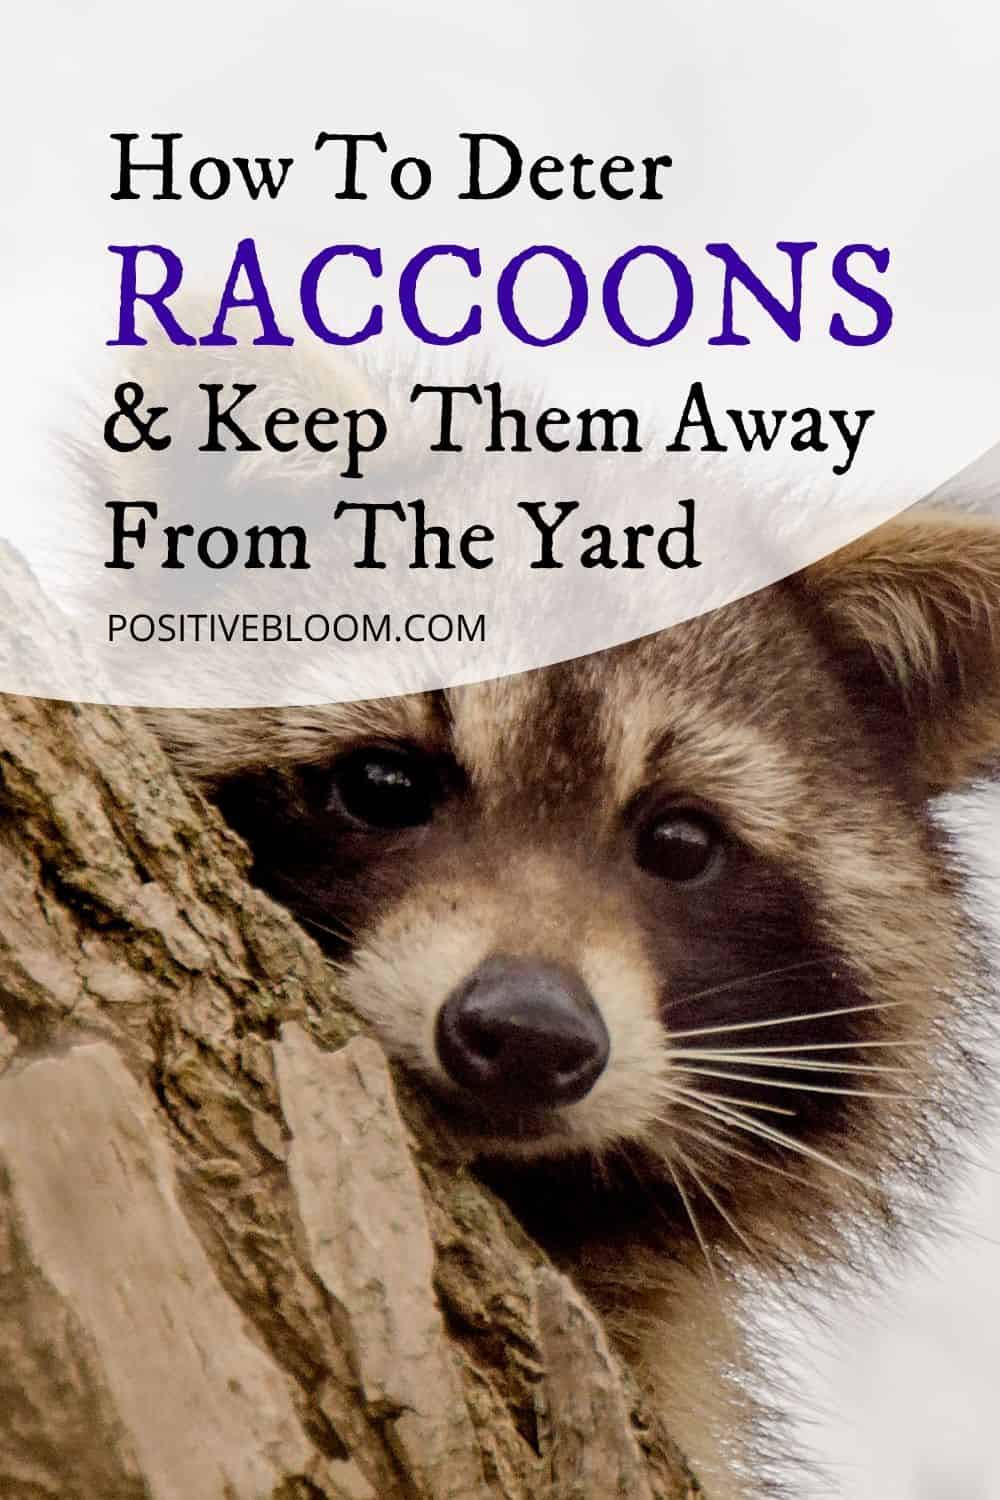 How To Deter Raccoons And Keep Them Away From The Yard Pinterest